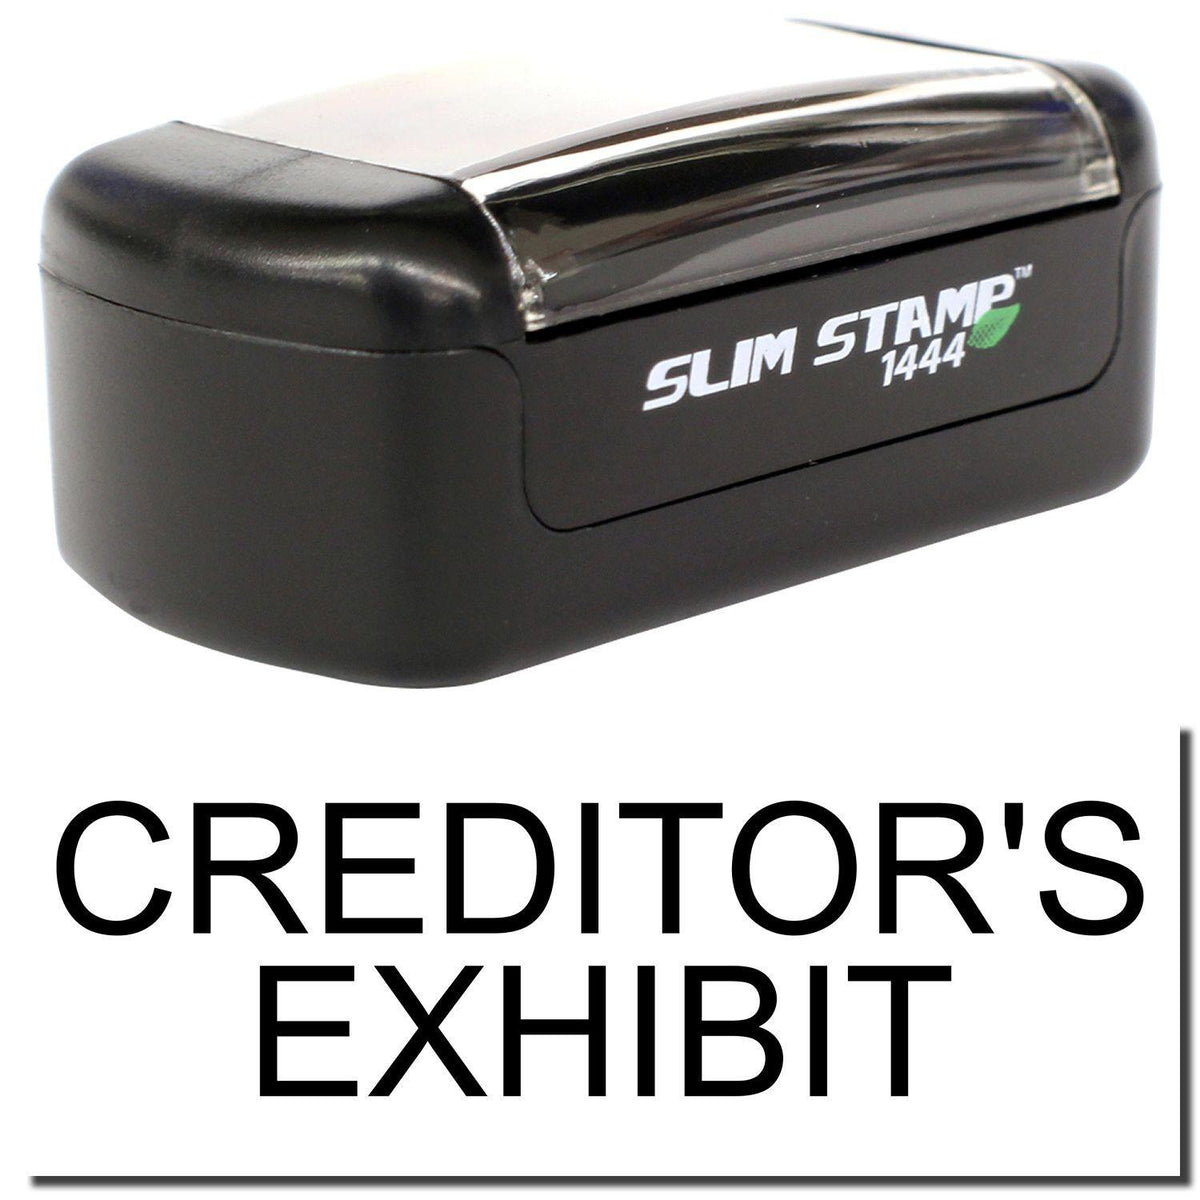 A stock office pre-inked stamp with a stamped image showing how the text &quot;CREDITOR&#39;S EXHIBIT&quot; is displayed after stamping.